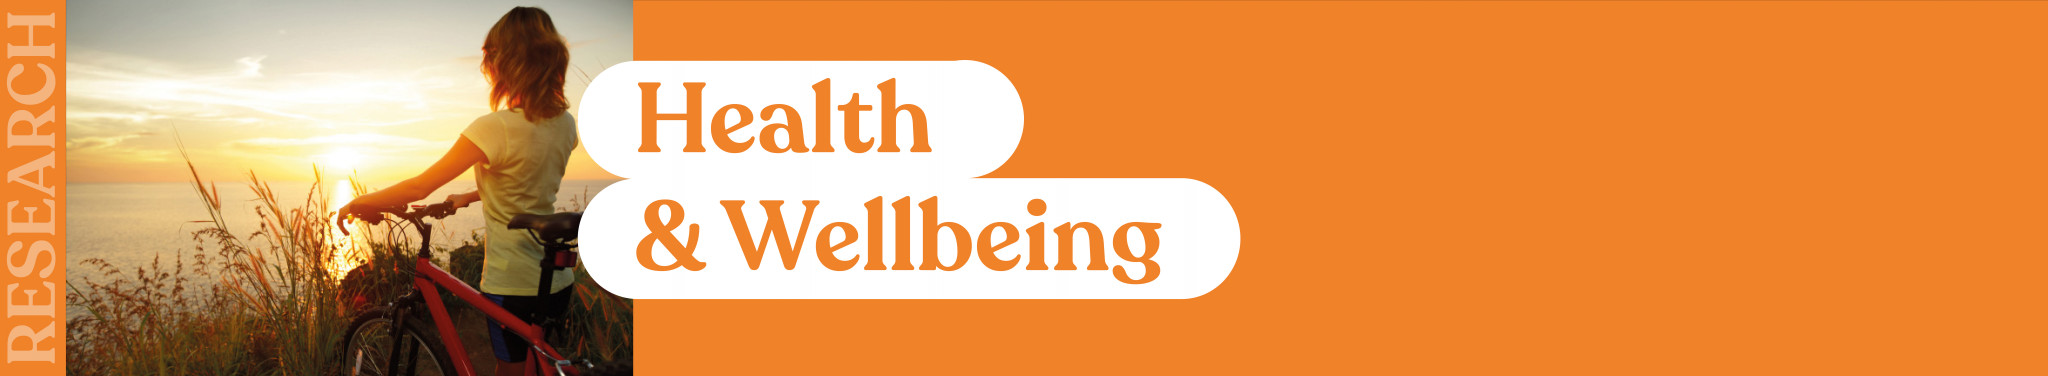 Read more about our Health and Wellbeing research